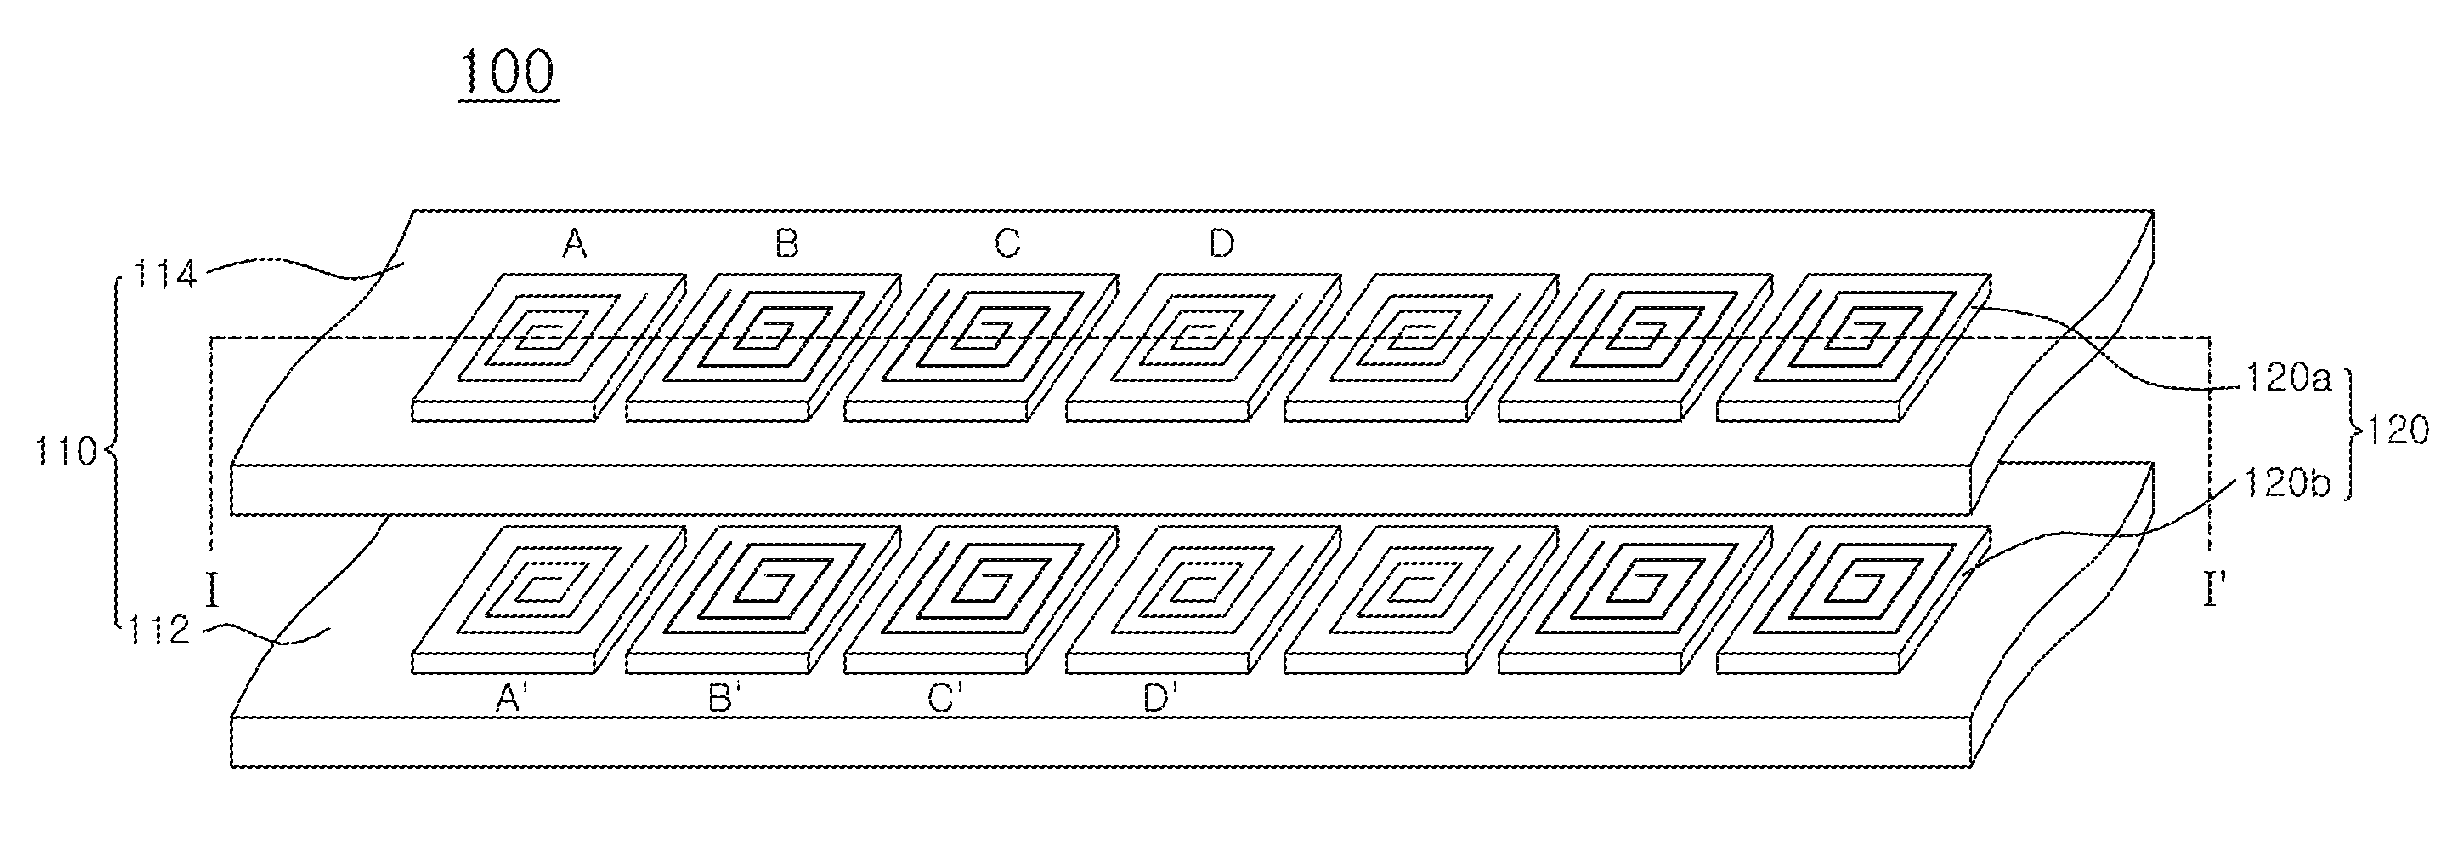 Multi-chip package with improved signal transmission